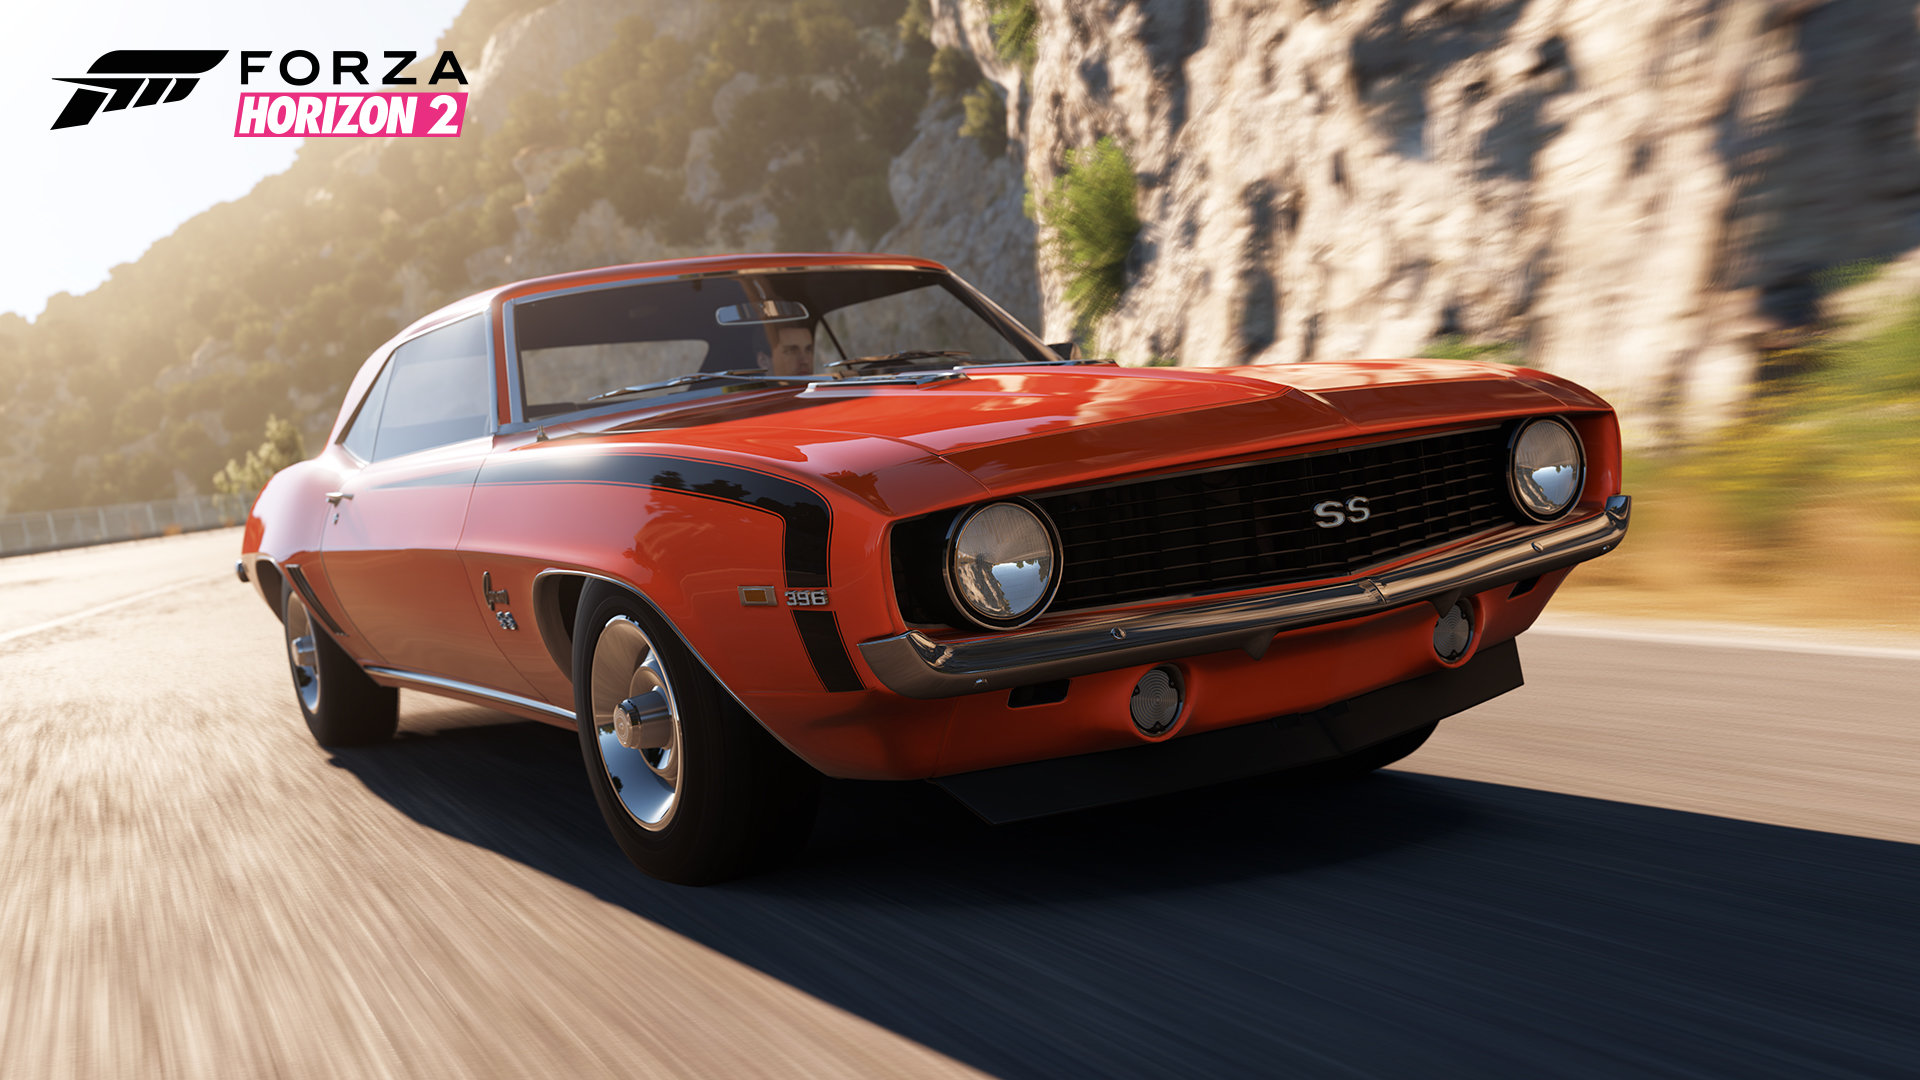 Awesome Forza Horizon 2 free background ID:69549 for full hd 1920x1080 computer